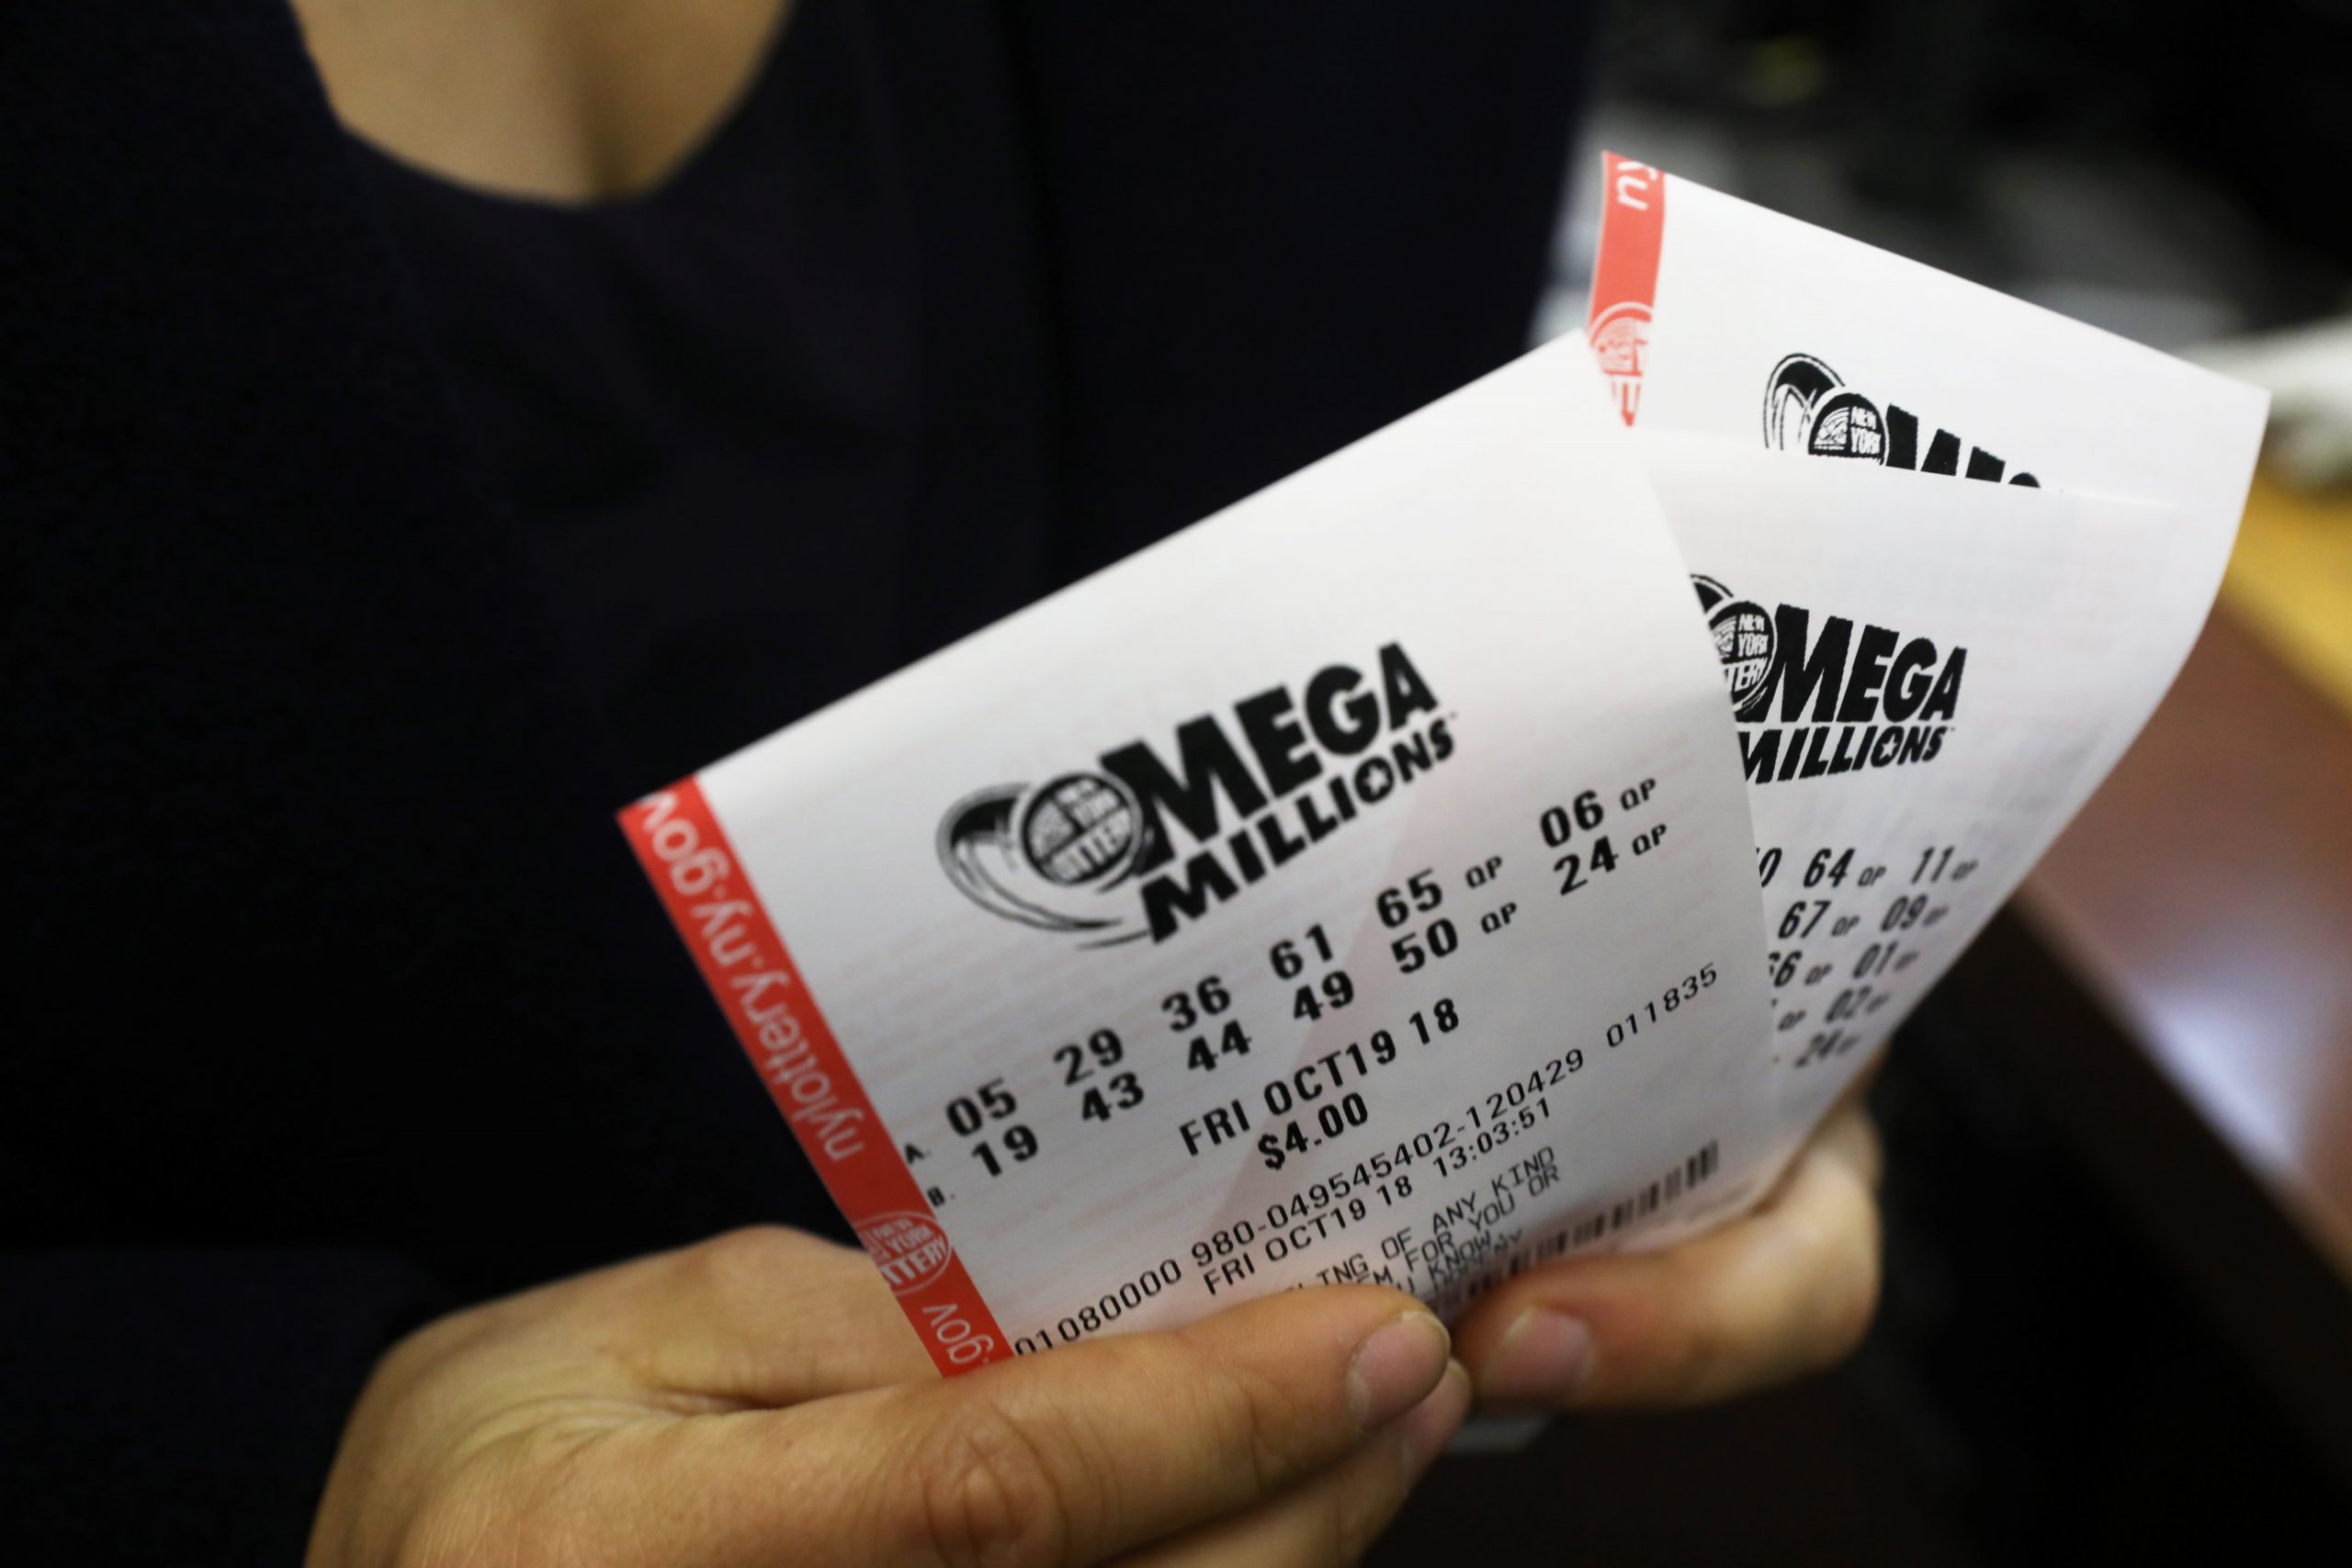 Mega Tens of millions jackpot is now $490 million and Powerball is $470 million